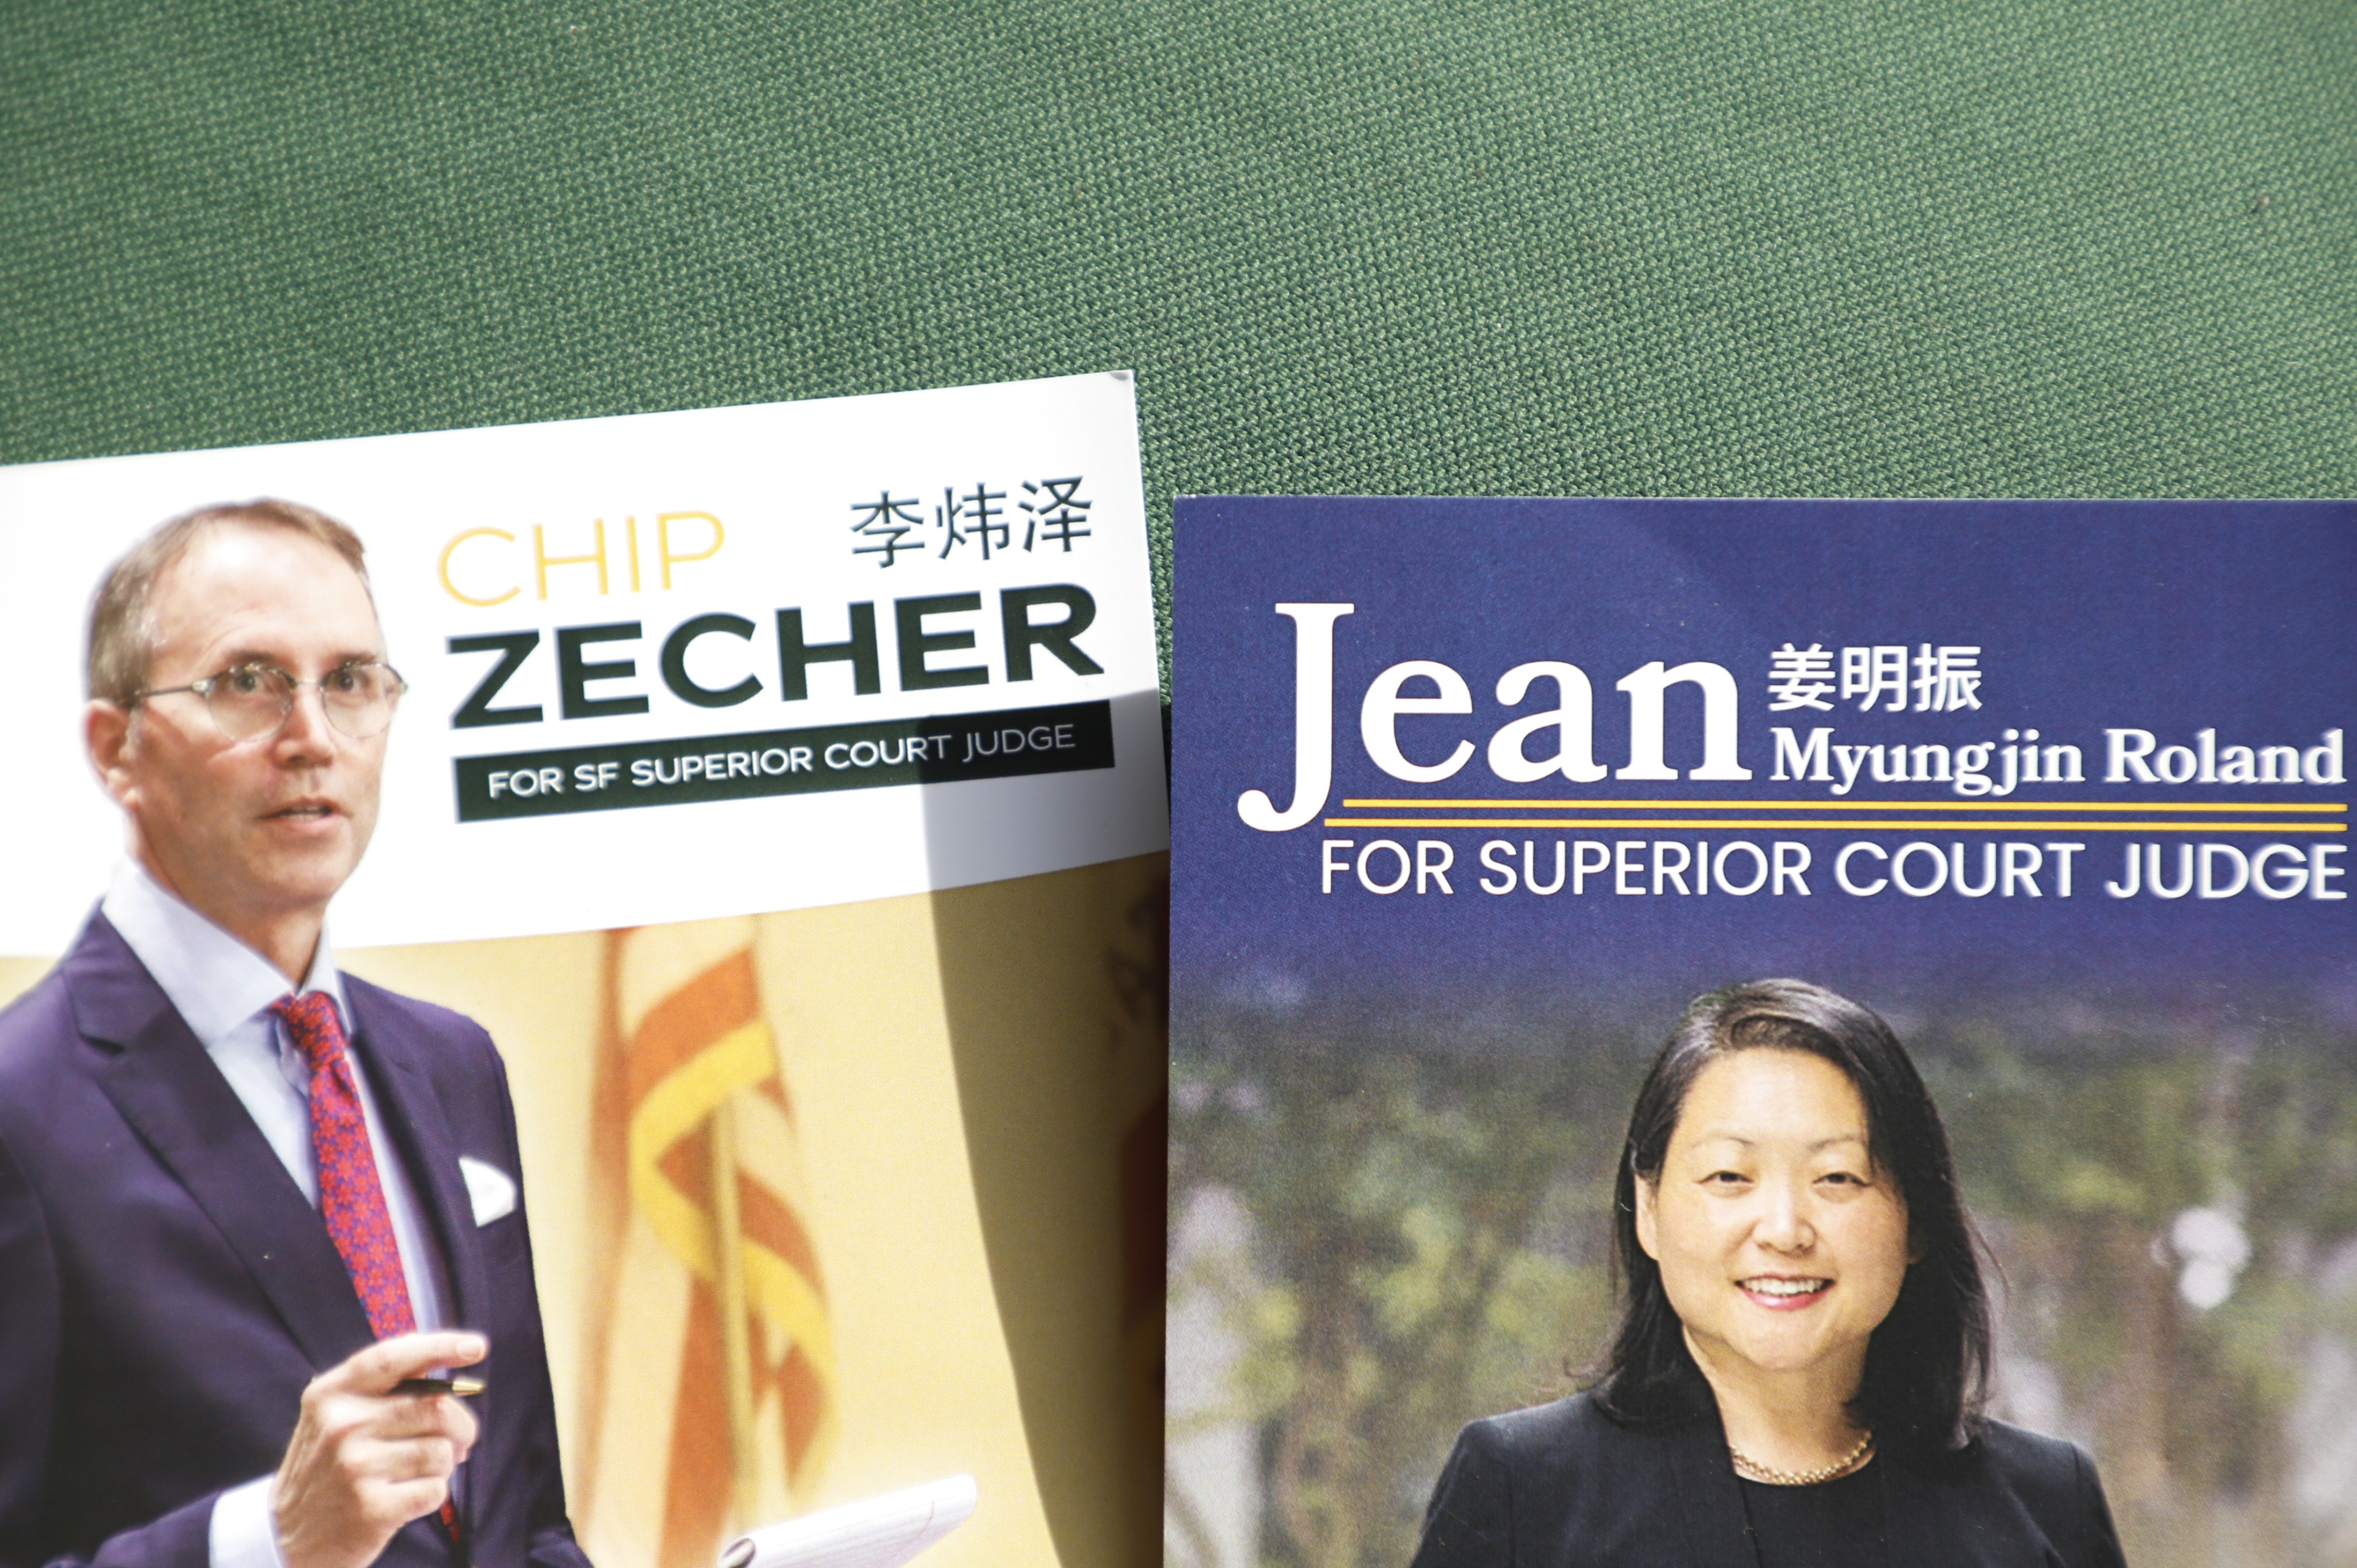 Campaign flyers for SF Superior Court judge candidates Chip Zecher, left, and Jean Myungin Roland have Chinese names next to their English names.